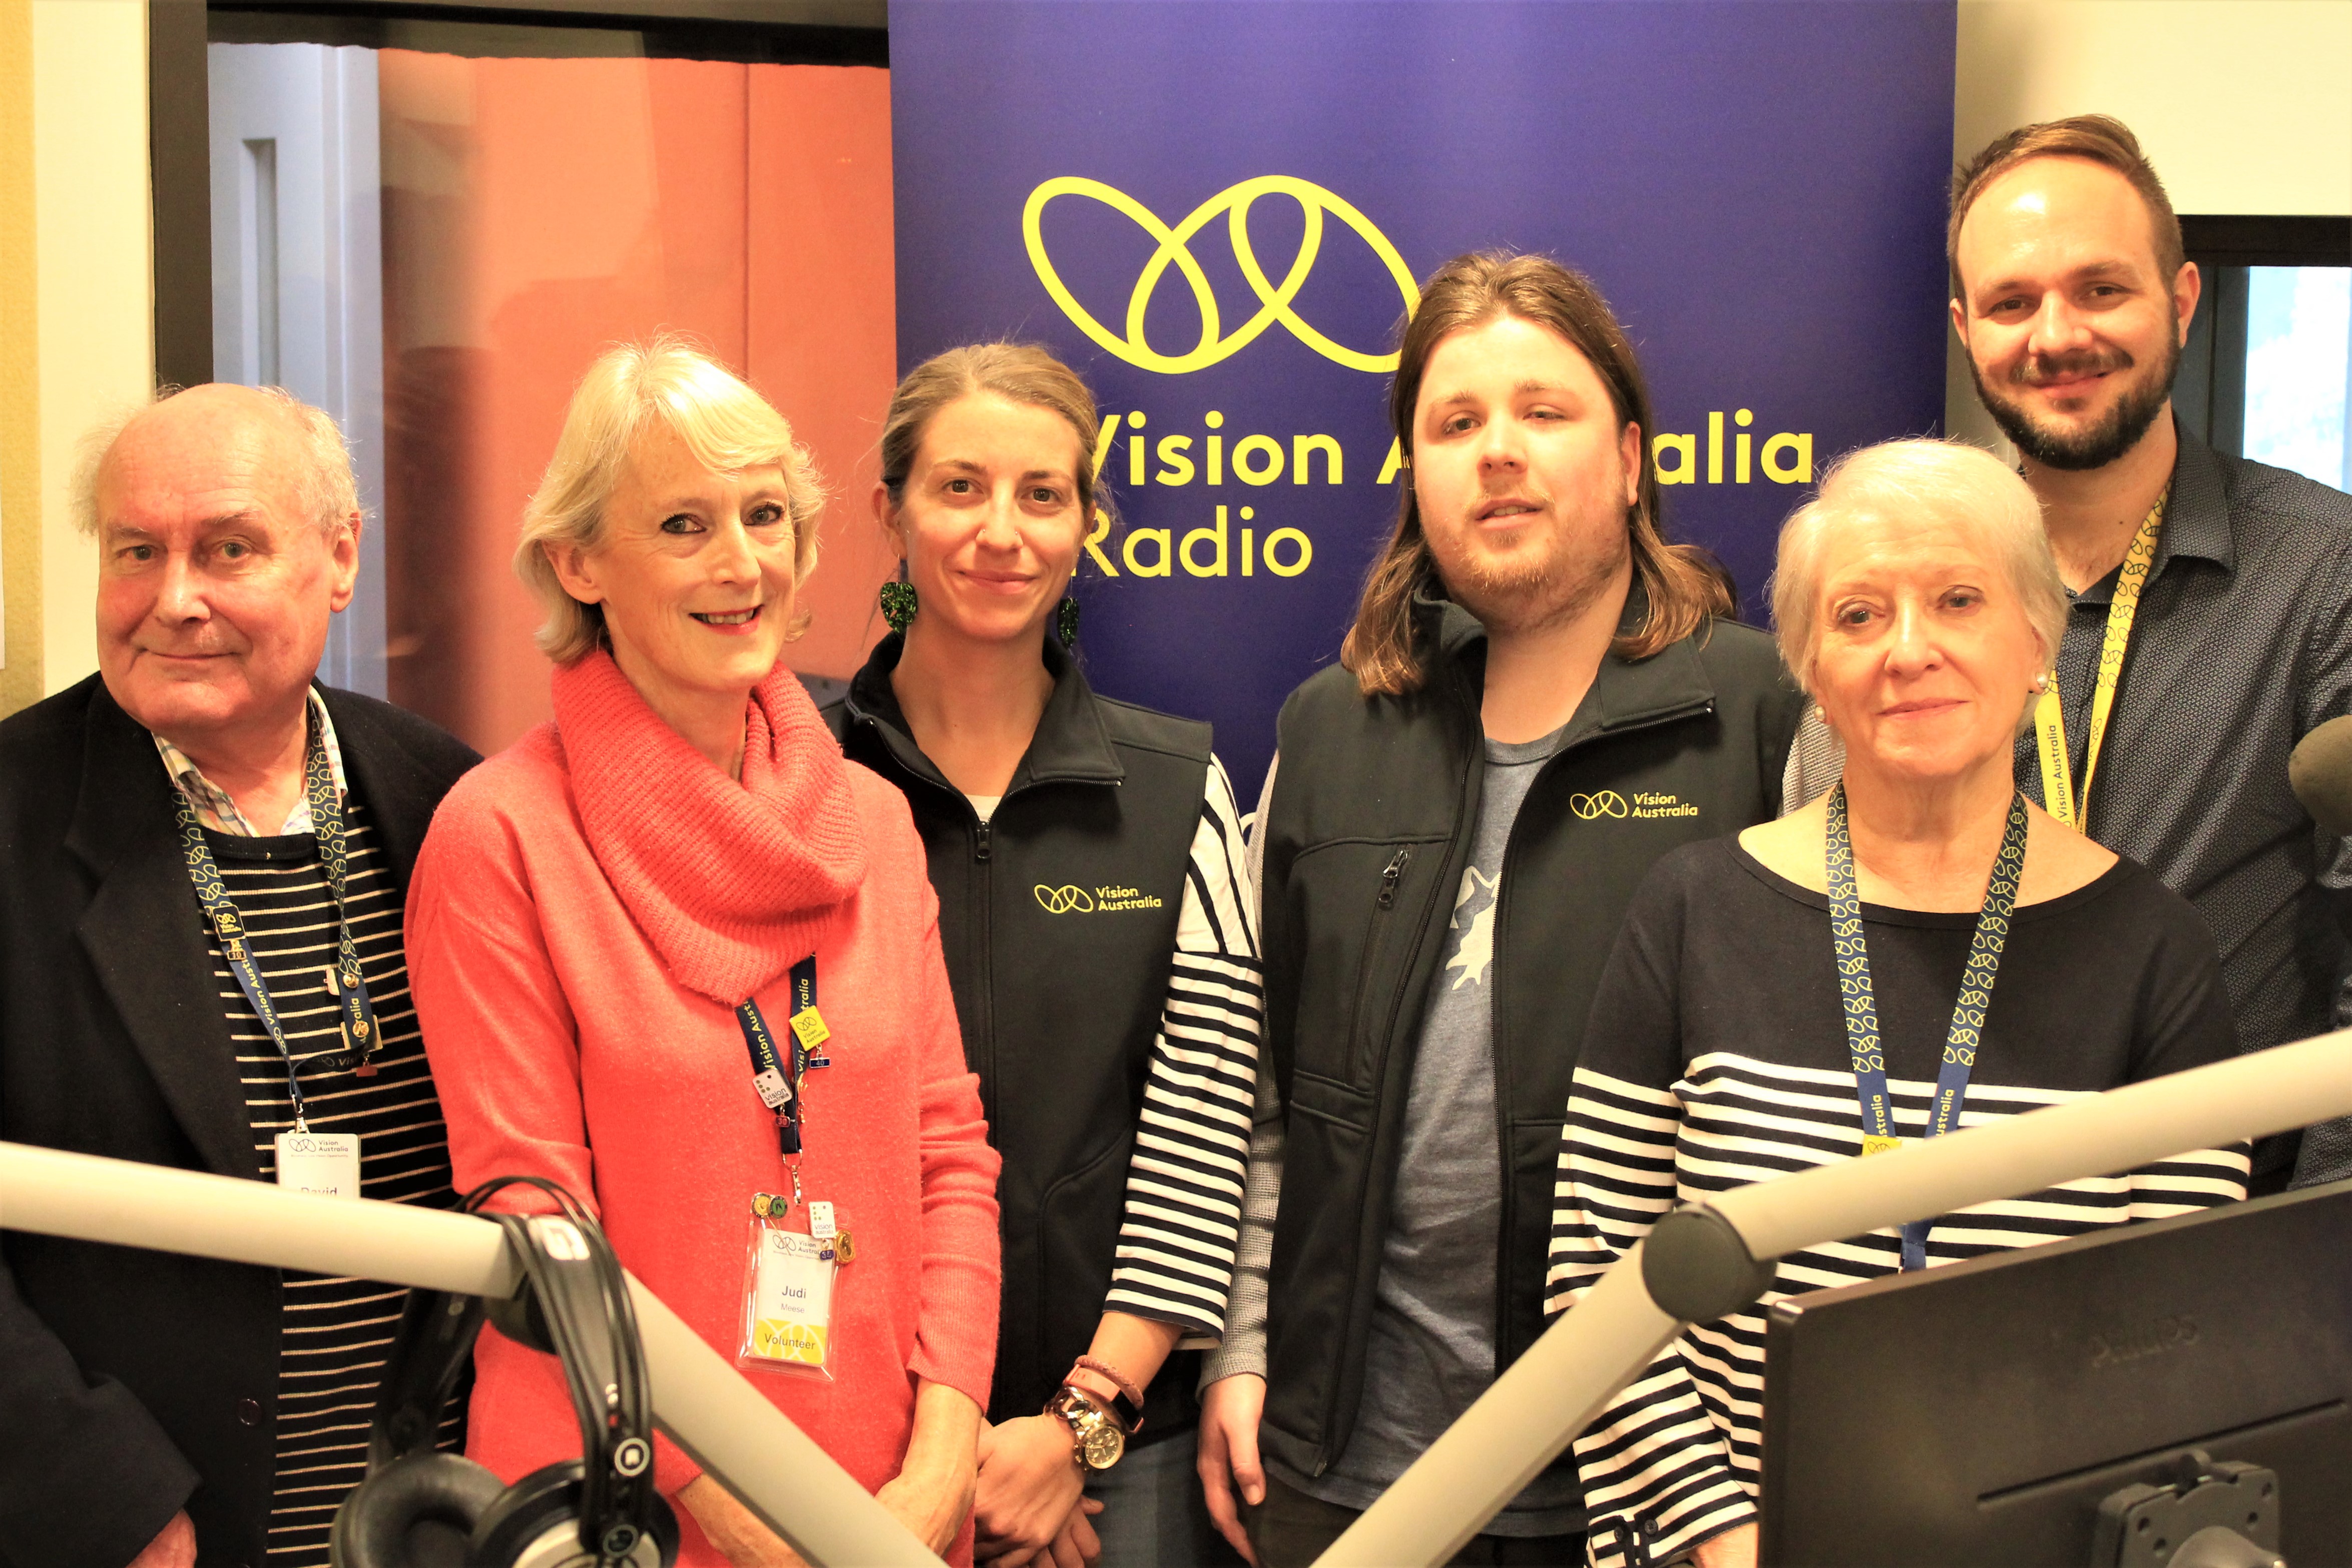 Vision Australia Radio staff and volunteers in the studio with Vision Australia Radio banner in the background